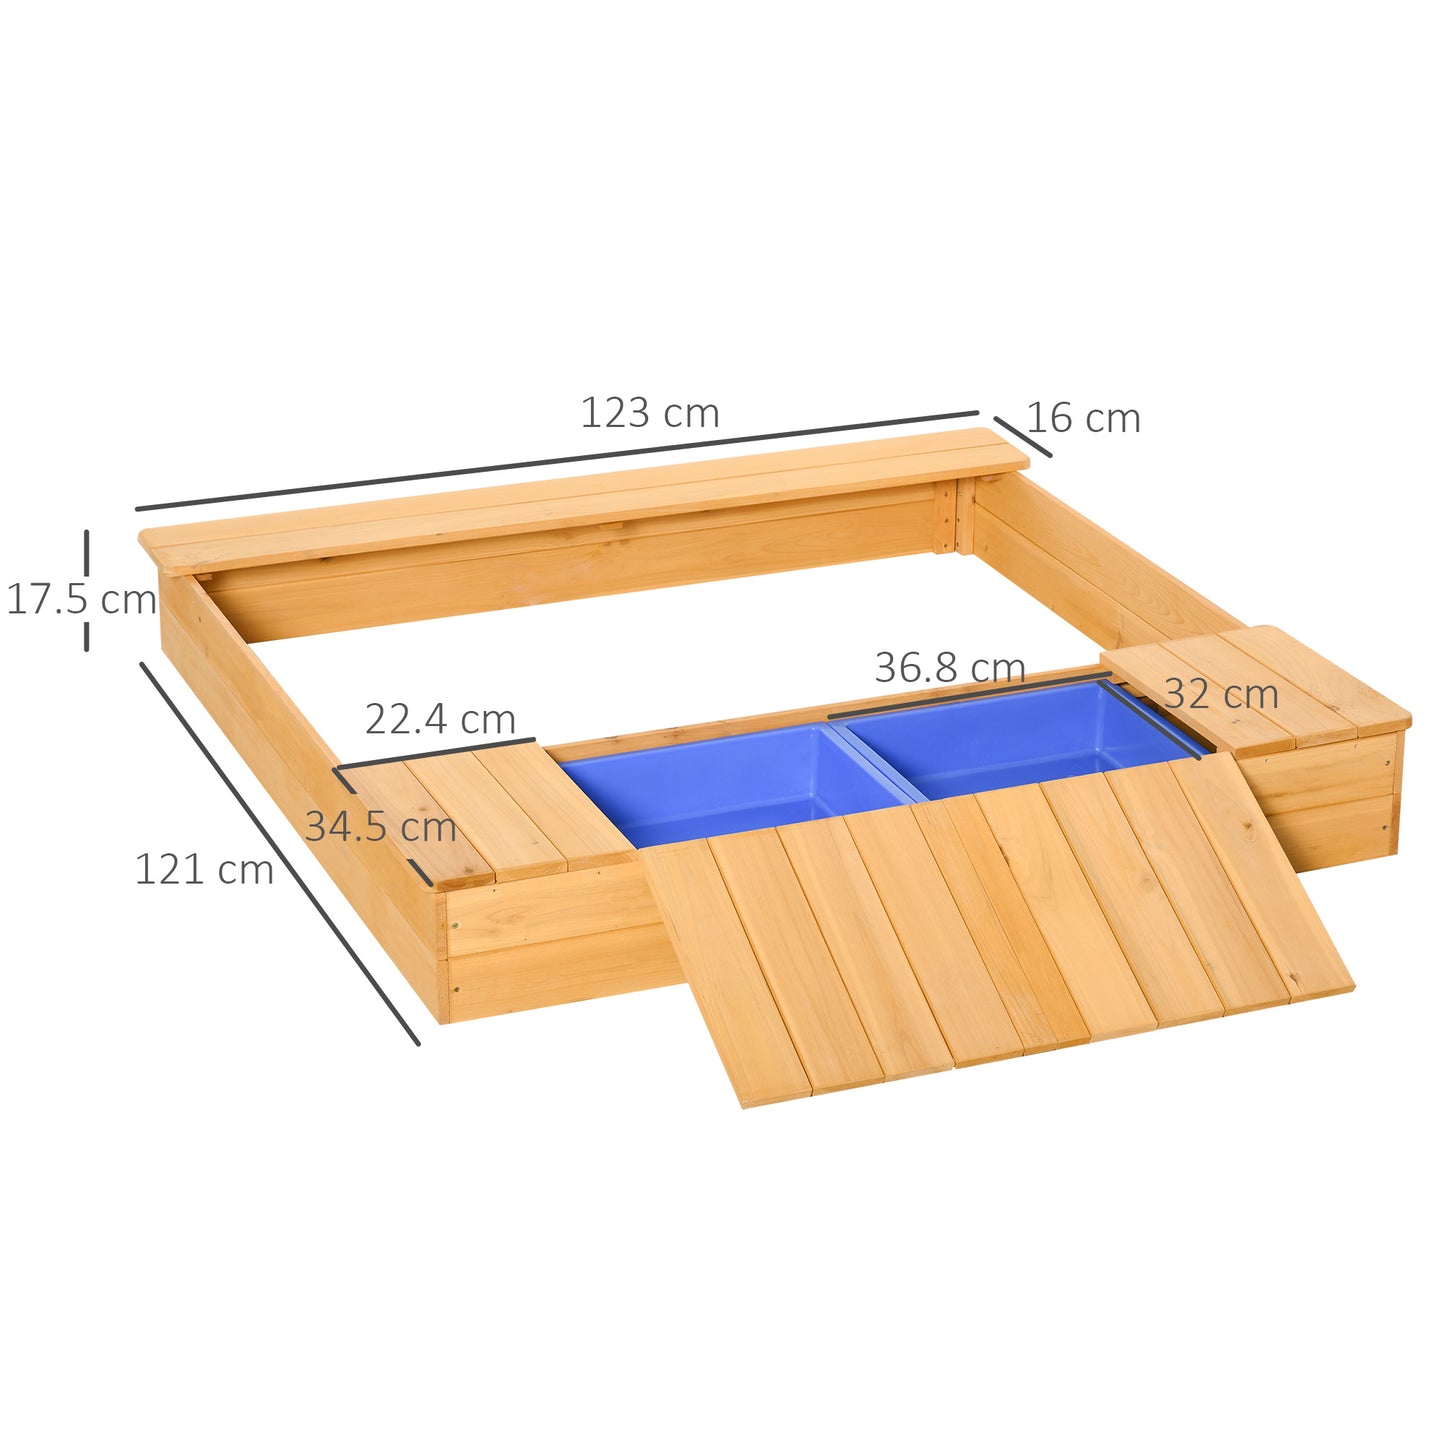 Outsunny Wooden Kids Sandpit Children Outdoor Square Sandbox with 2 Side Buckets Bench